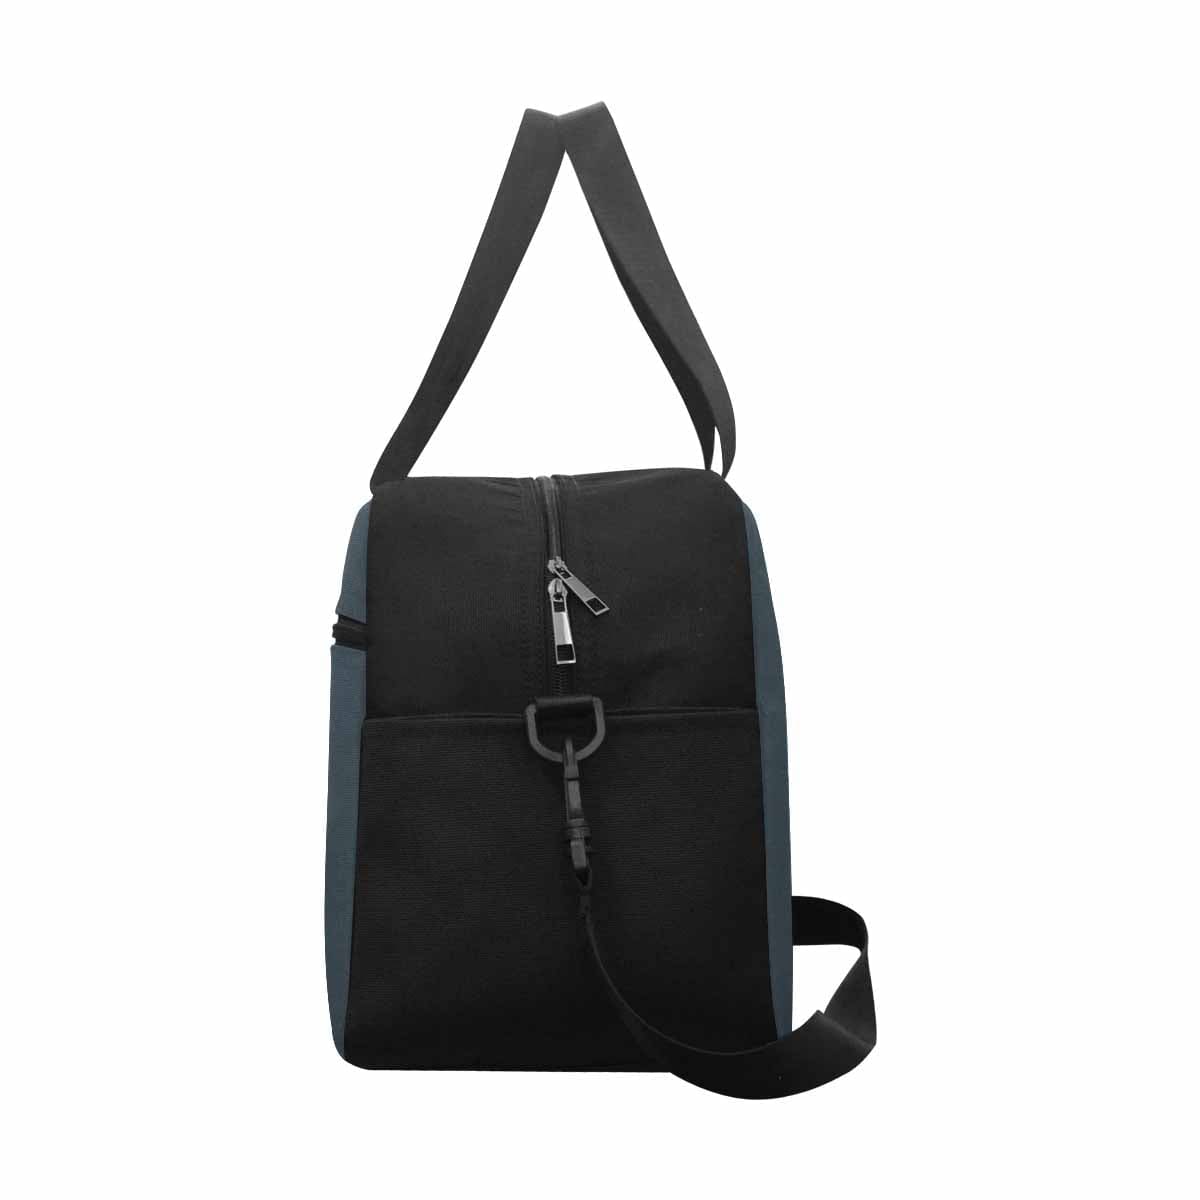 Charcoal Black Tote And Crossbody Travel Bag - Bags | Travel Bags | Crossbody